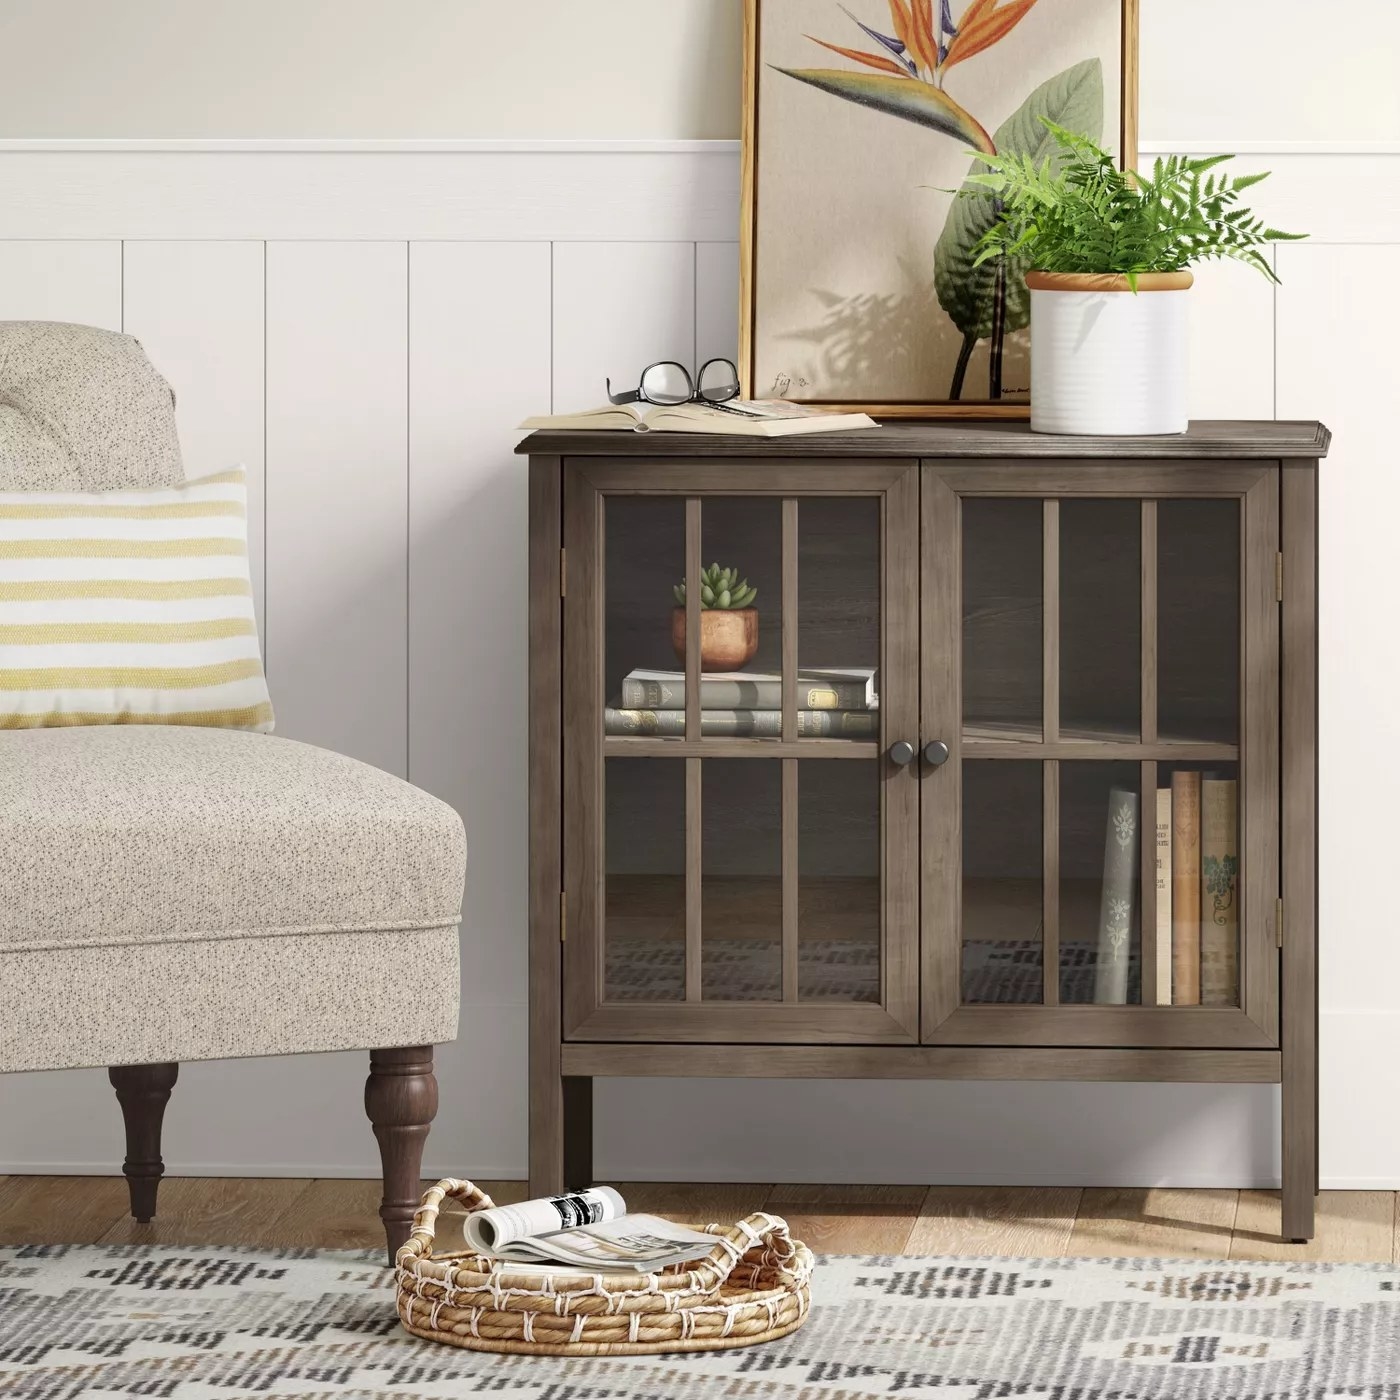 The accent cabinet with two glass doors in a living room